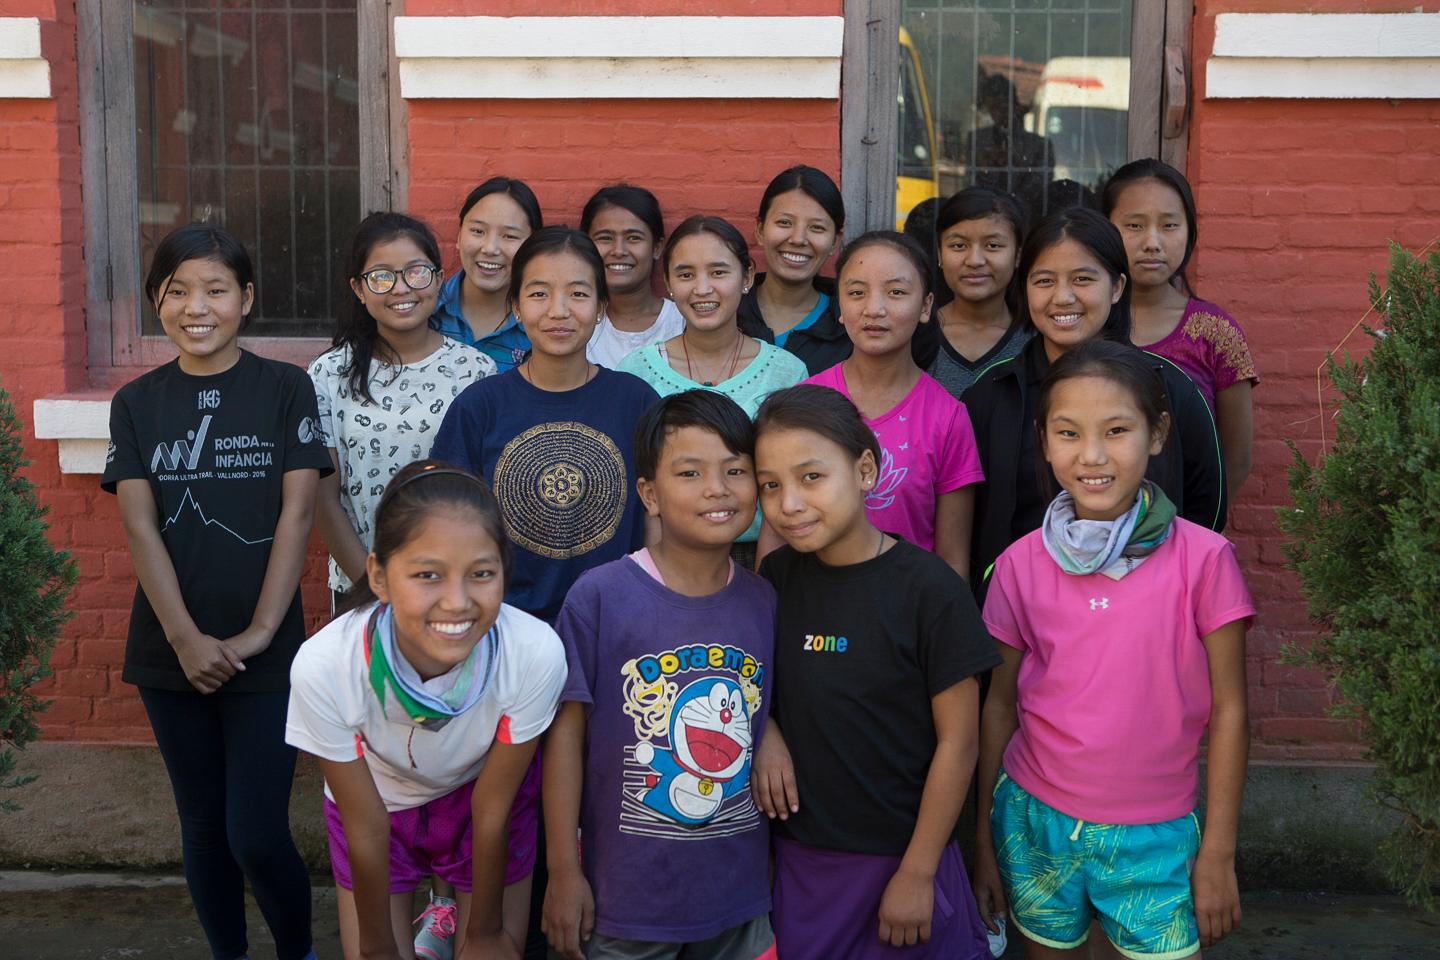 Girls in the Himalayan Children’s Foundation running club in Kathmandu, Nepal say they’re inspired by Mira Rai’s success in sports.